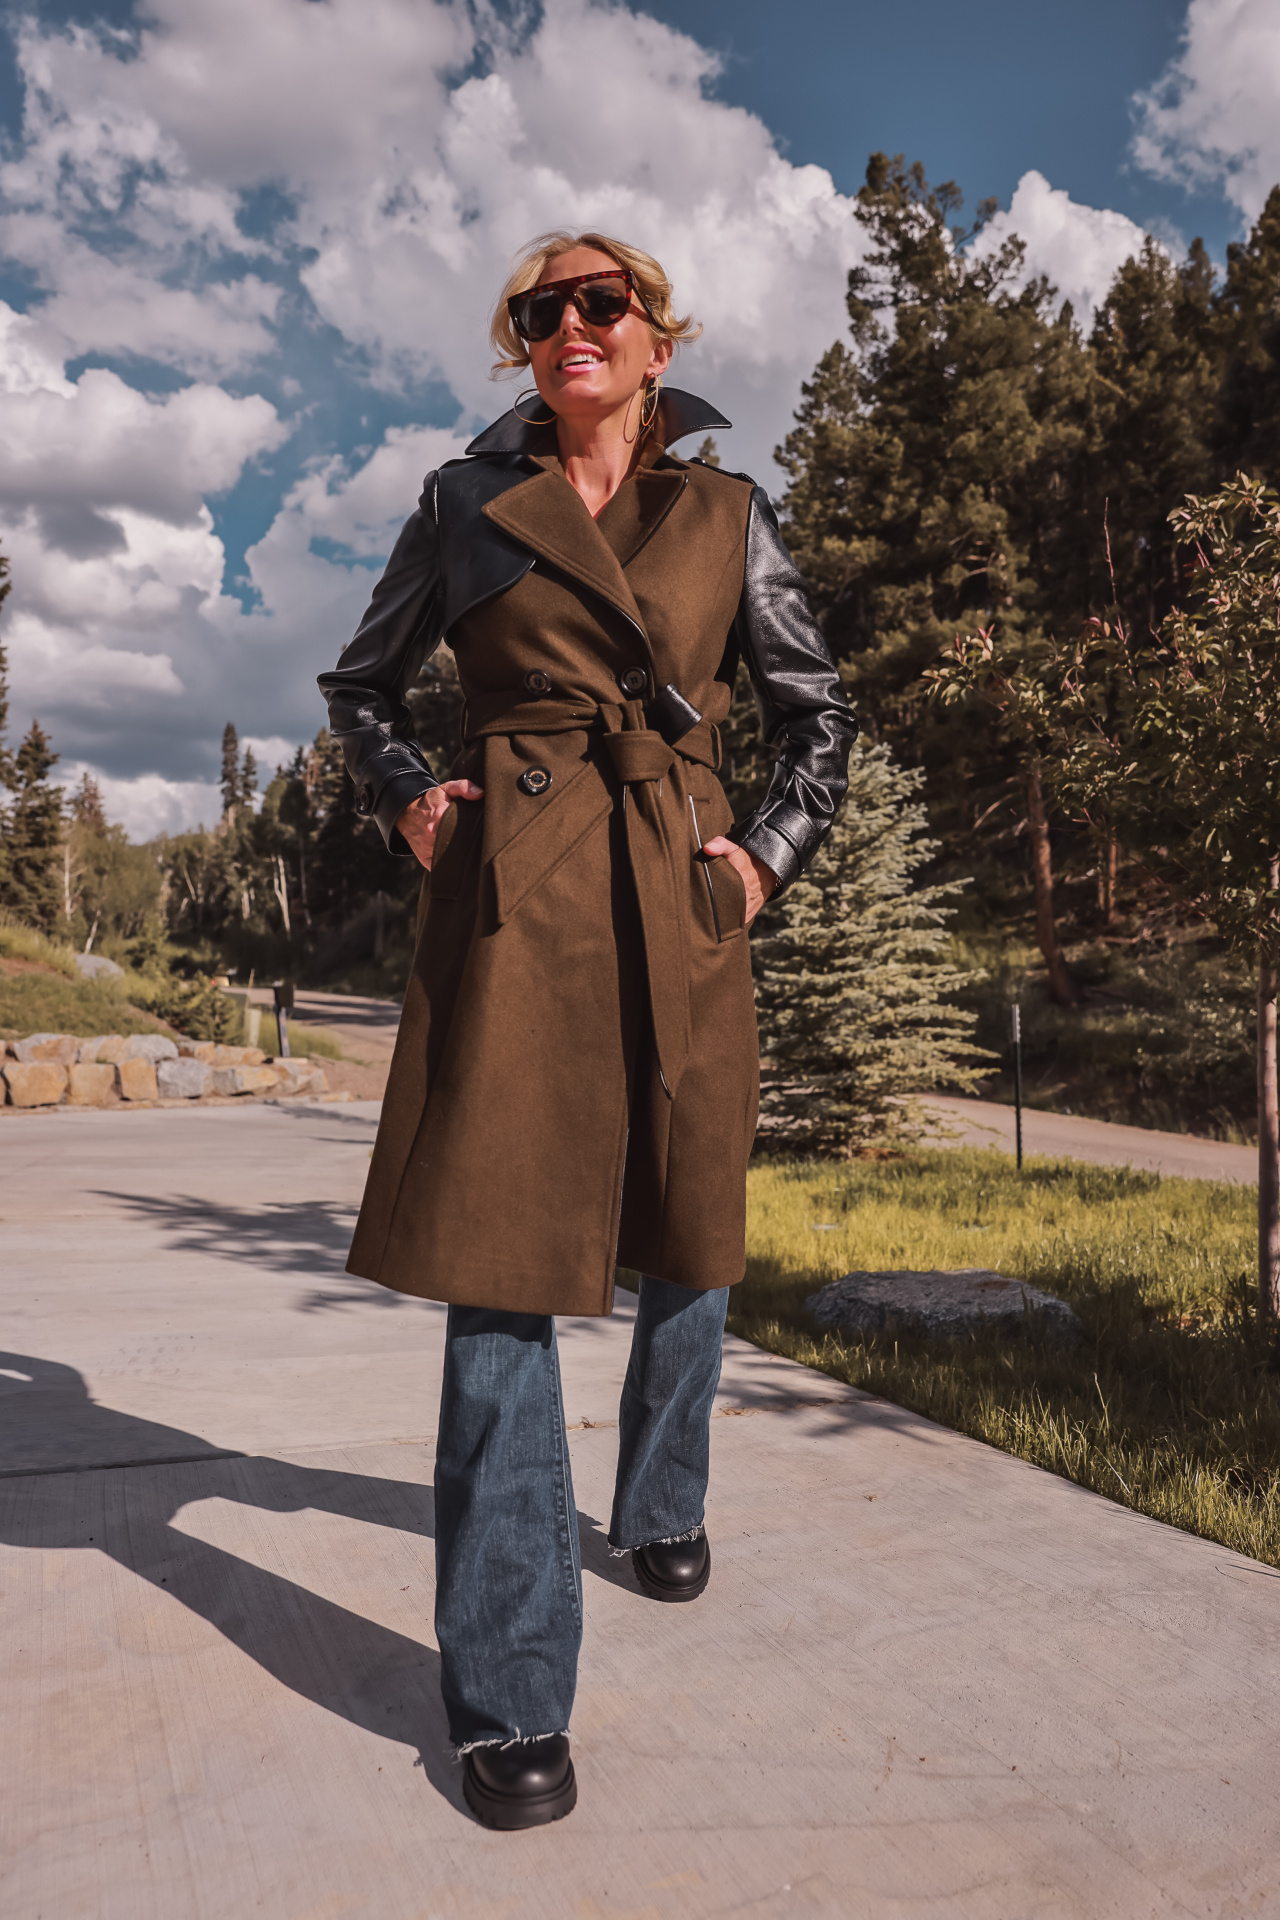 wearable fall trends, fall fashion trends, fall trends, wearable trends, how to wear trends, trends over 40, wearing trends over 40, 2022 fall fashion trends, 2022 wearable fall trends, iconic 80s